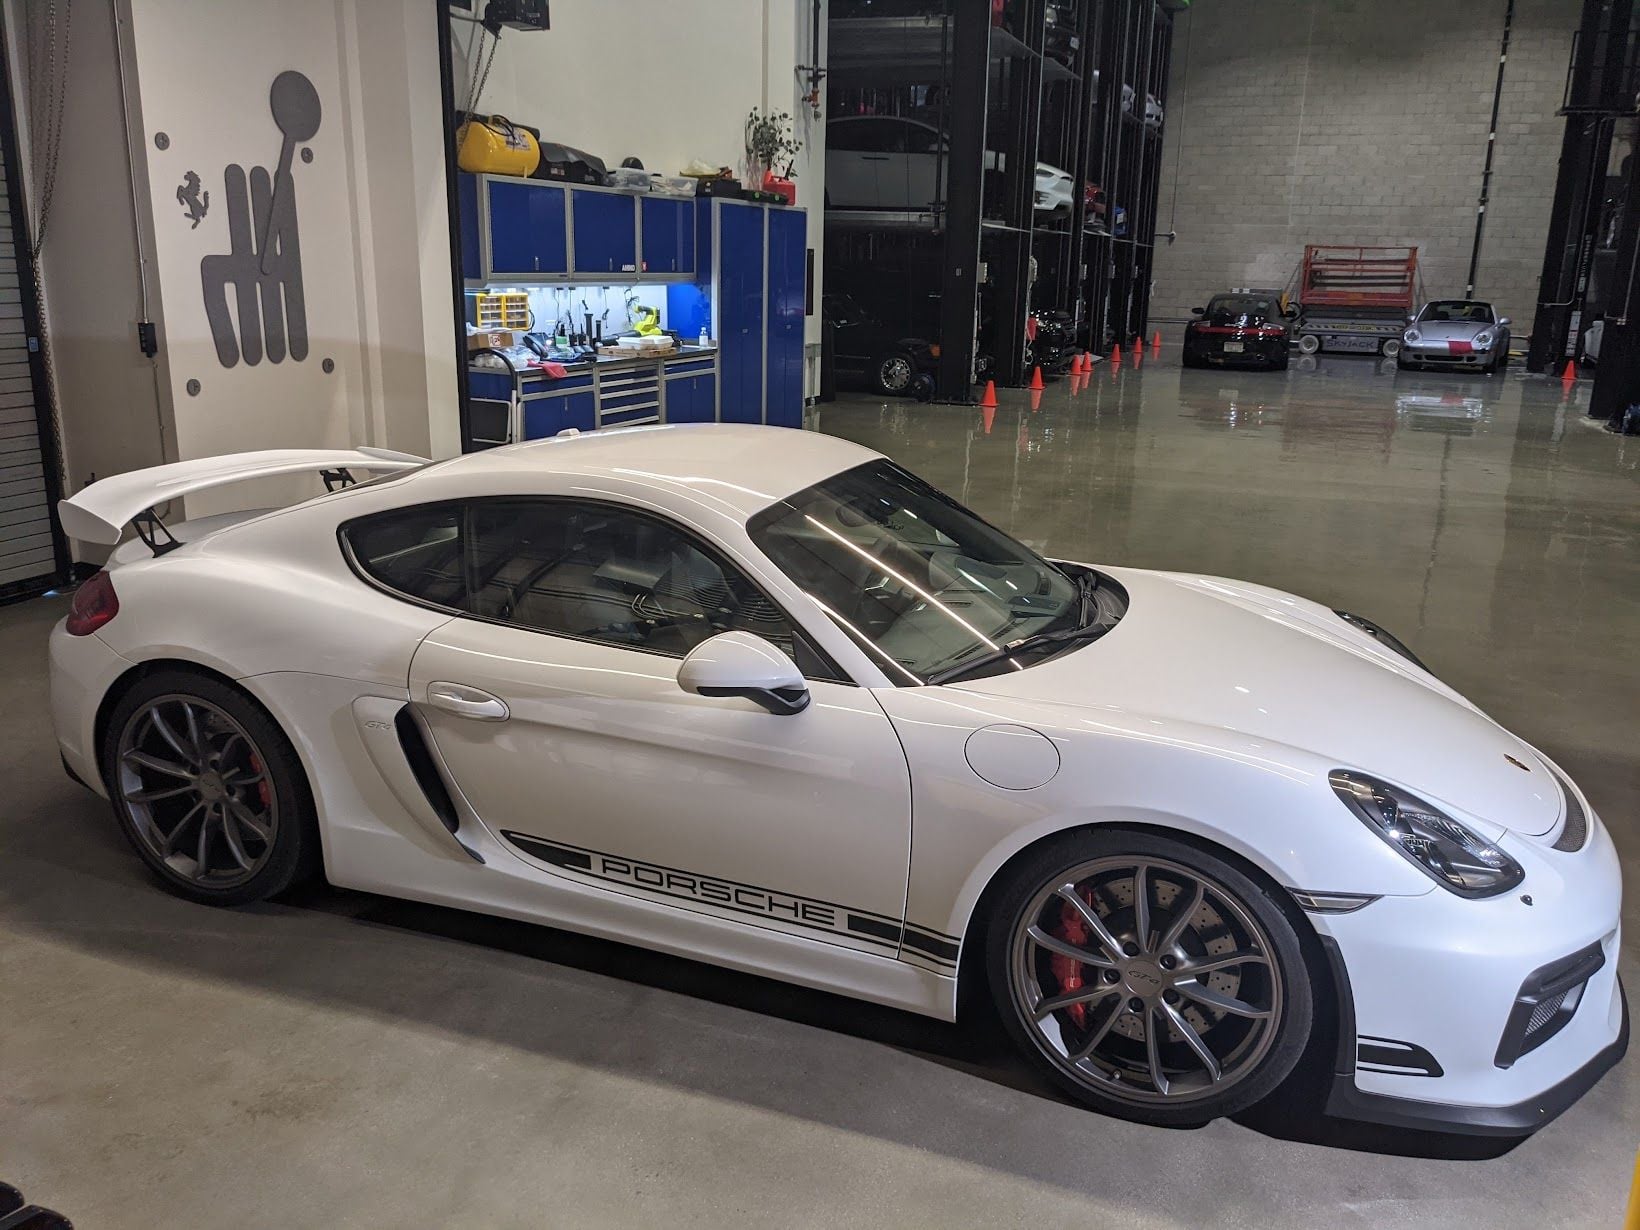 2016 Porsche Cayman GT4 - 2016 Porsche GT4 - Manual / 37k miles - PENDING SALE - Used - VIN WP0AC2A84GK192646 - 37,000 Miles - 6 cyl - 2WD - Manual - Coupe - White - Los Angeles, CA 90291, United States